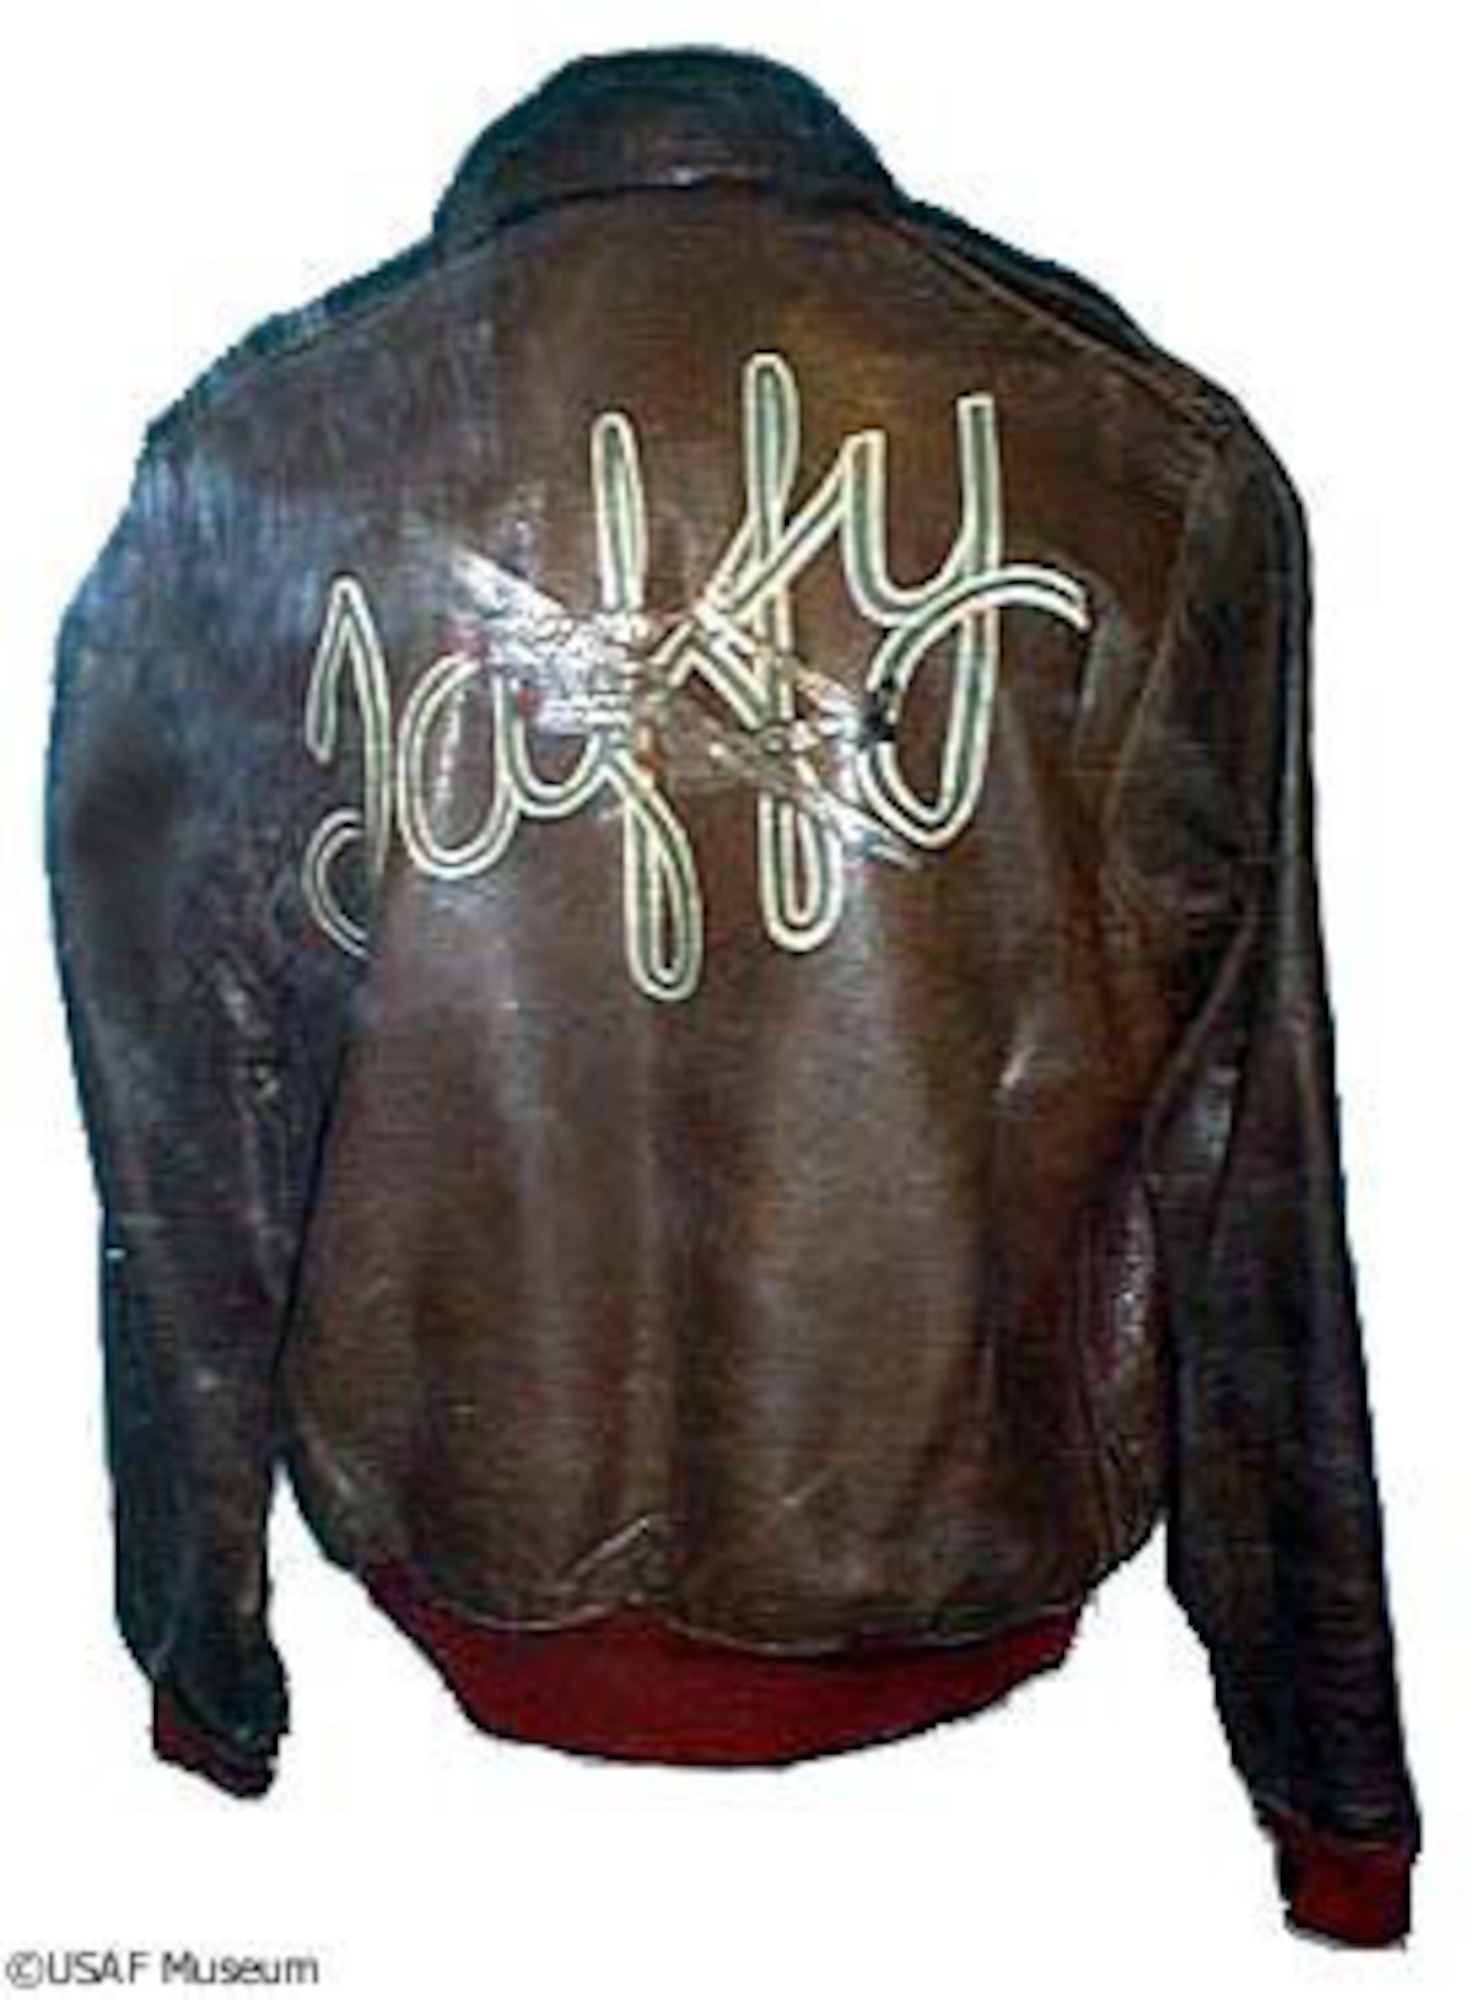 DAYTON, Ohio -- "Taffy" aviator jacket on display at the National Museum of the United States Air Force. (U.S. Air Force photo)